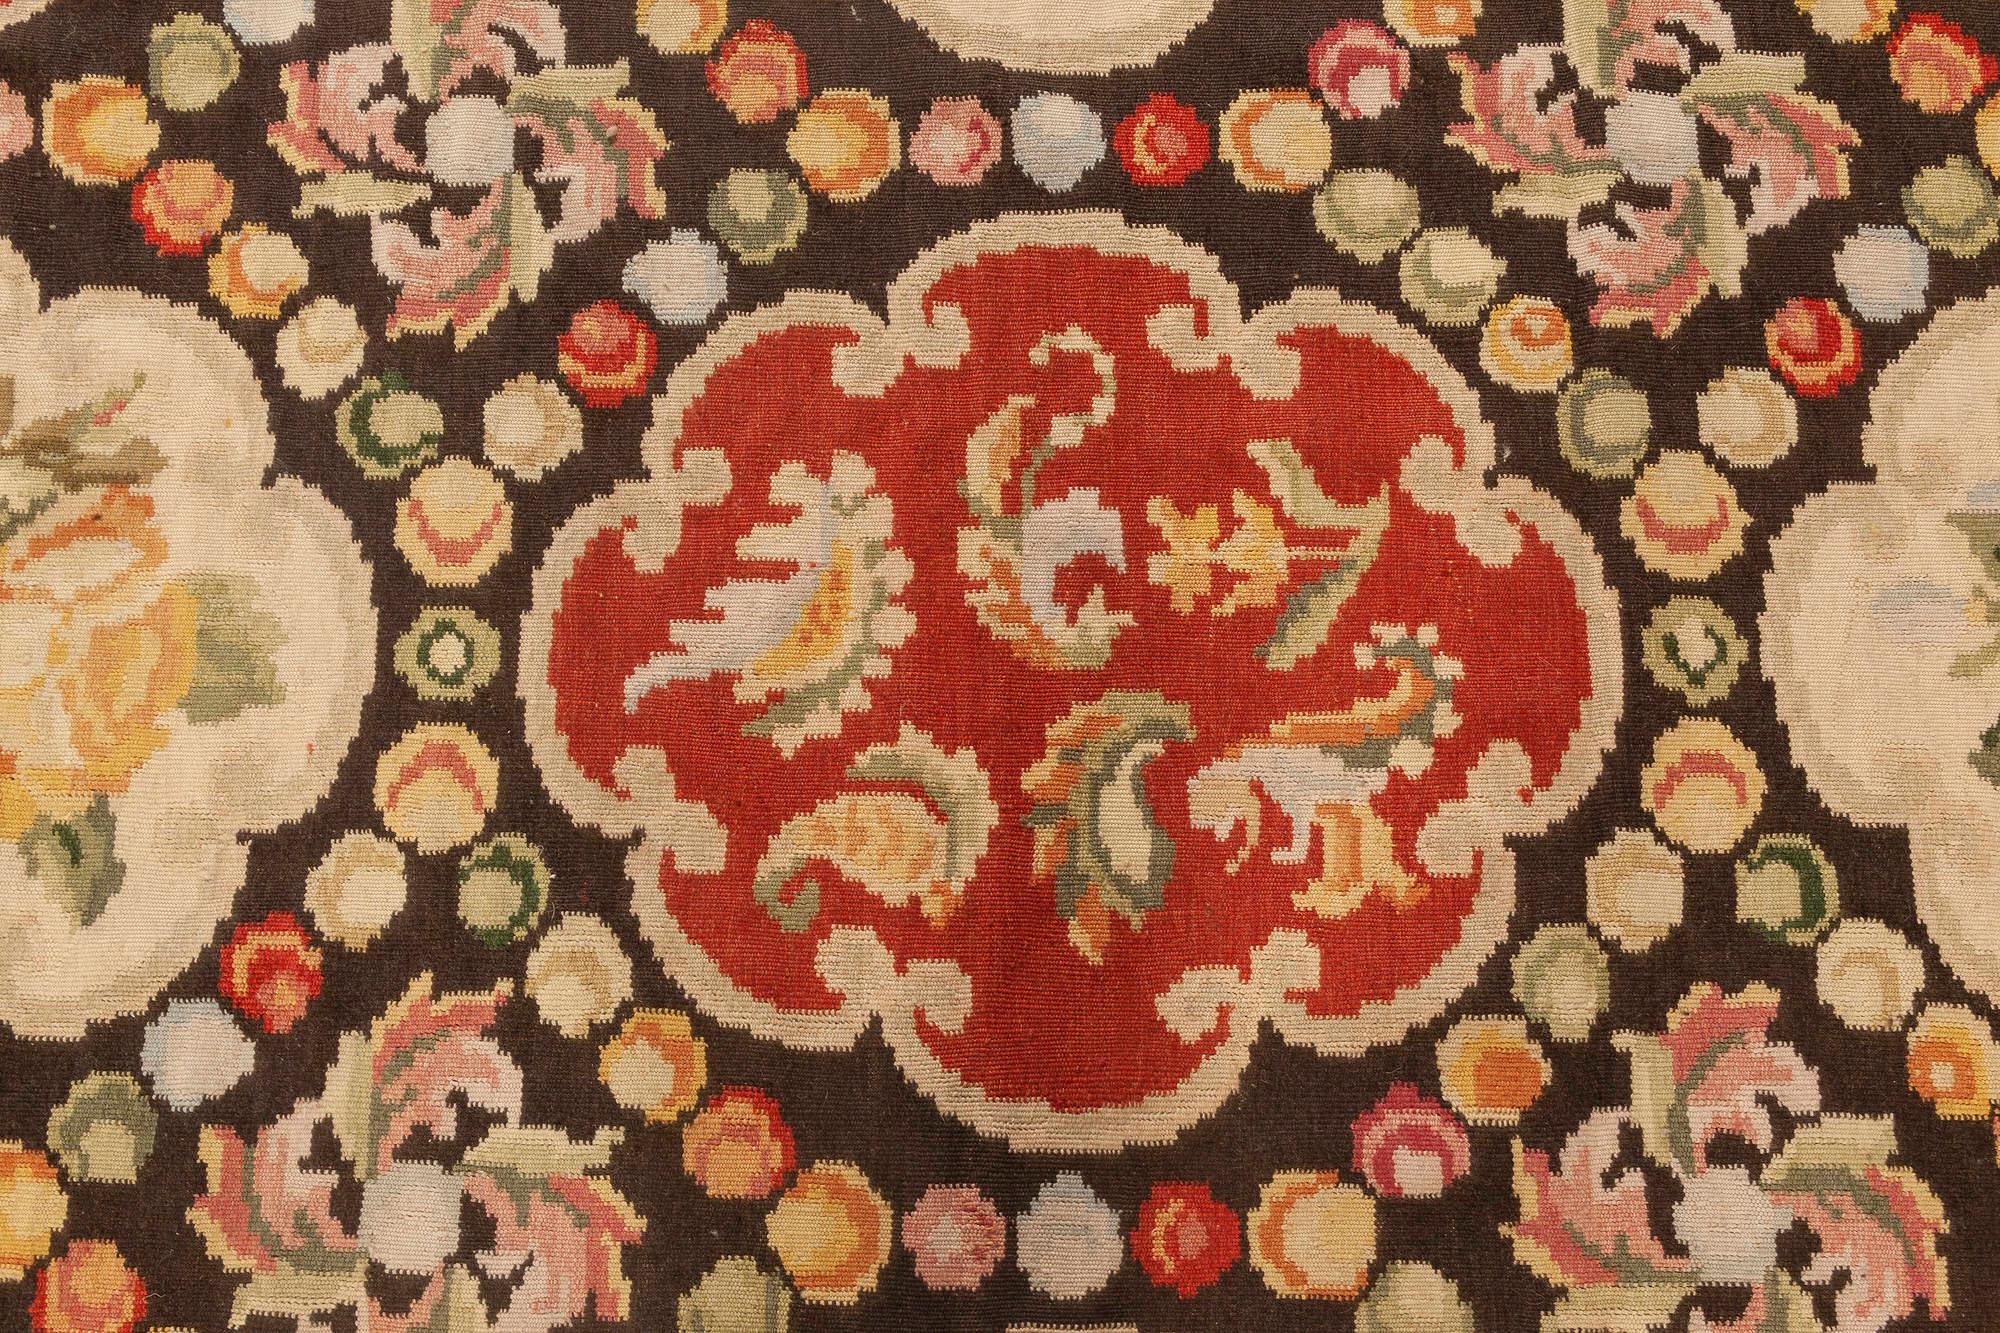 Chinese Contemporary Bessarabian Floral Design Wool Rug by Doris Leslie Blau For Sale